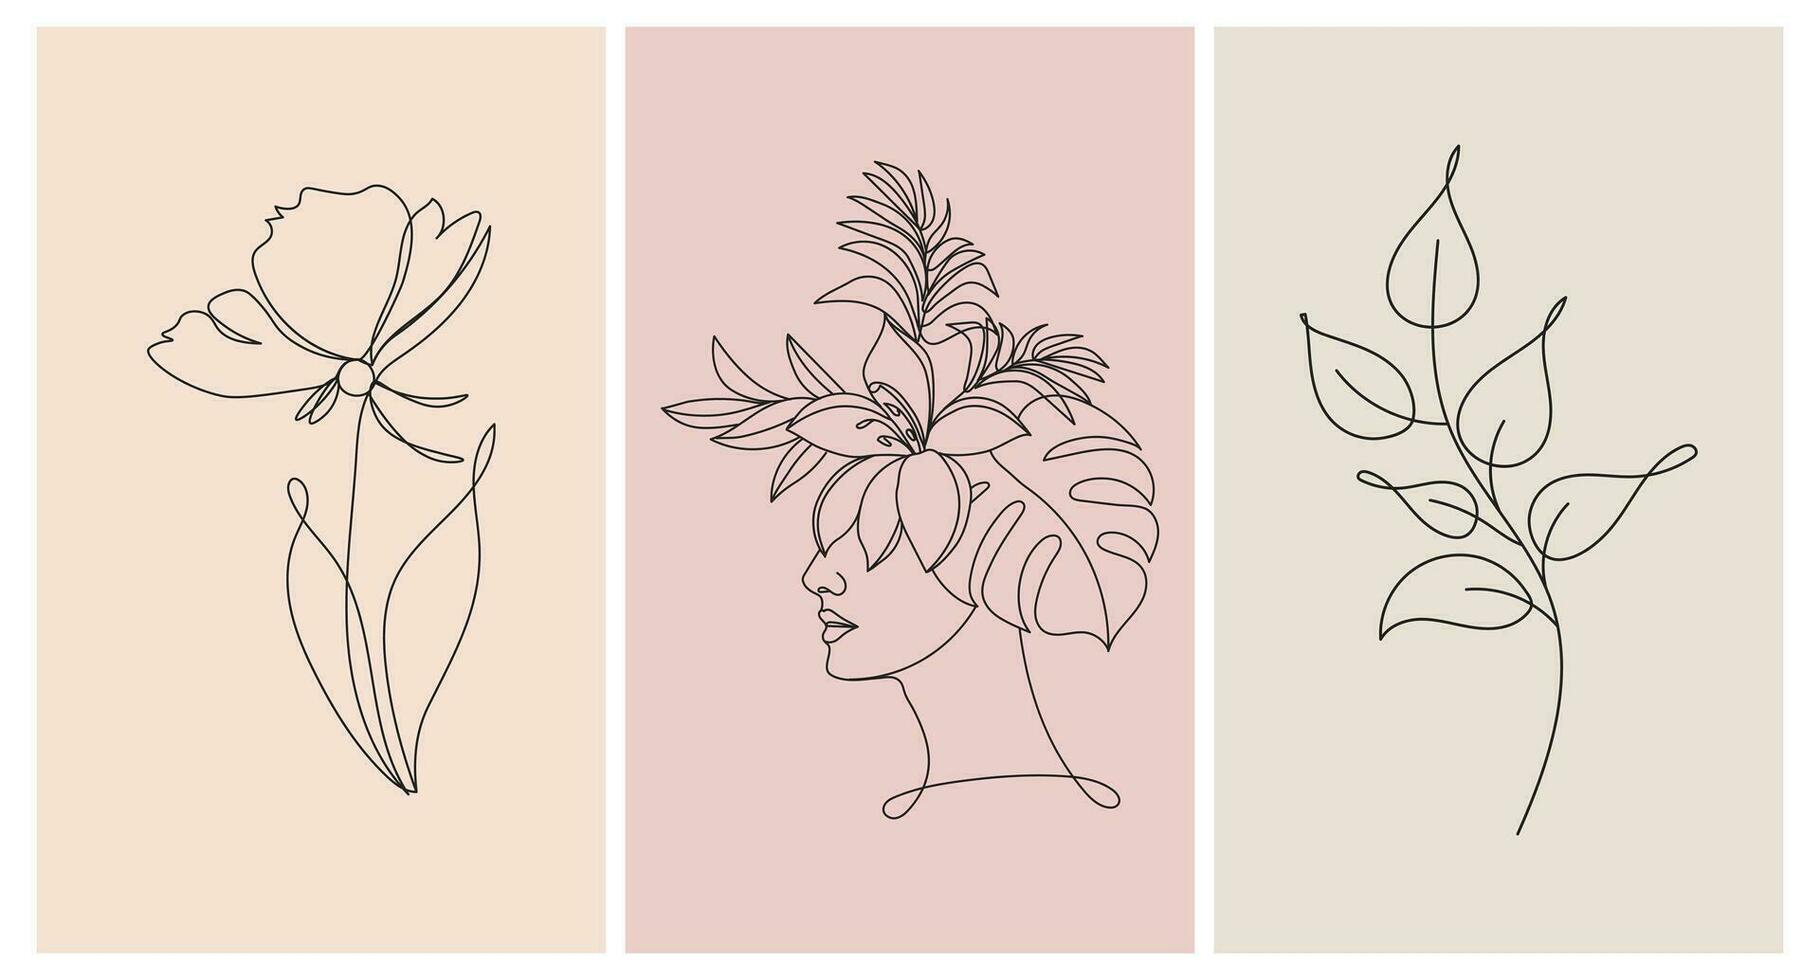 Abstract female portrait and flowers, line art. Set of posters, greeting cards, wall art. Black line on an abstract background in pastel colors. vector